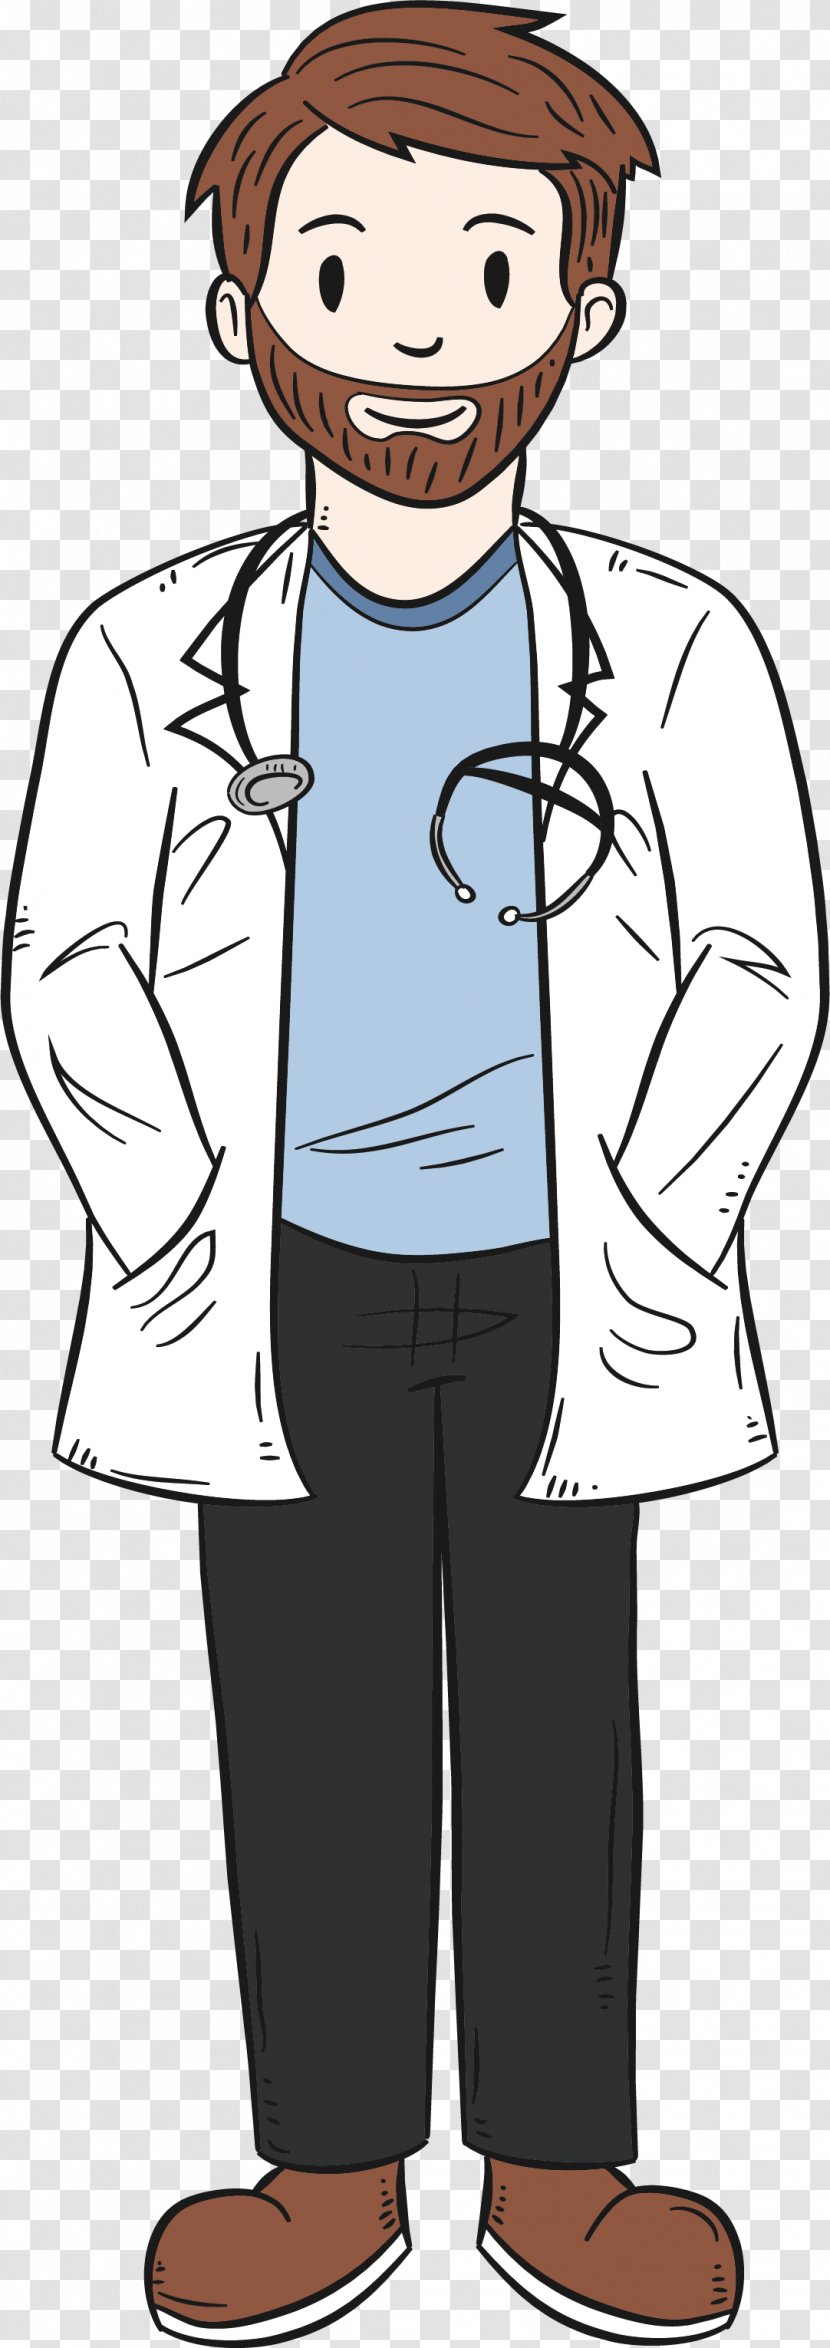 Physician Surgeon Illustration - Frame - Hand Painted Foreign Doctor Transparent PNG